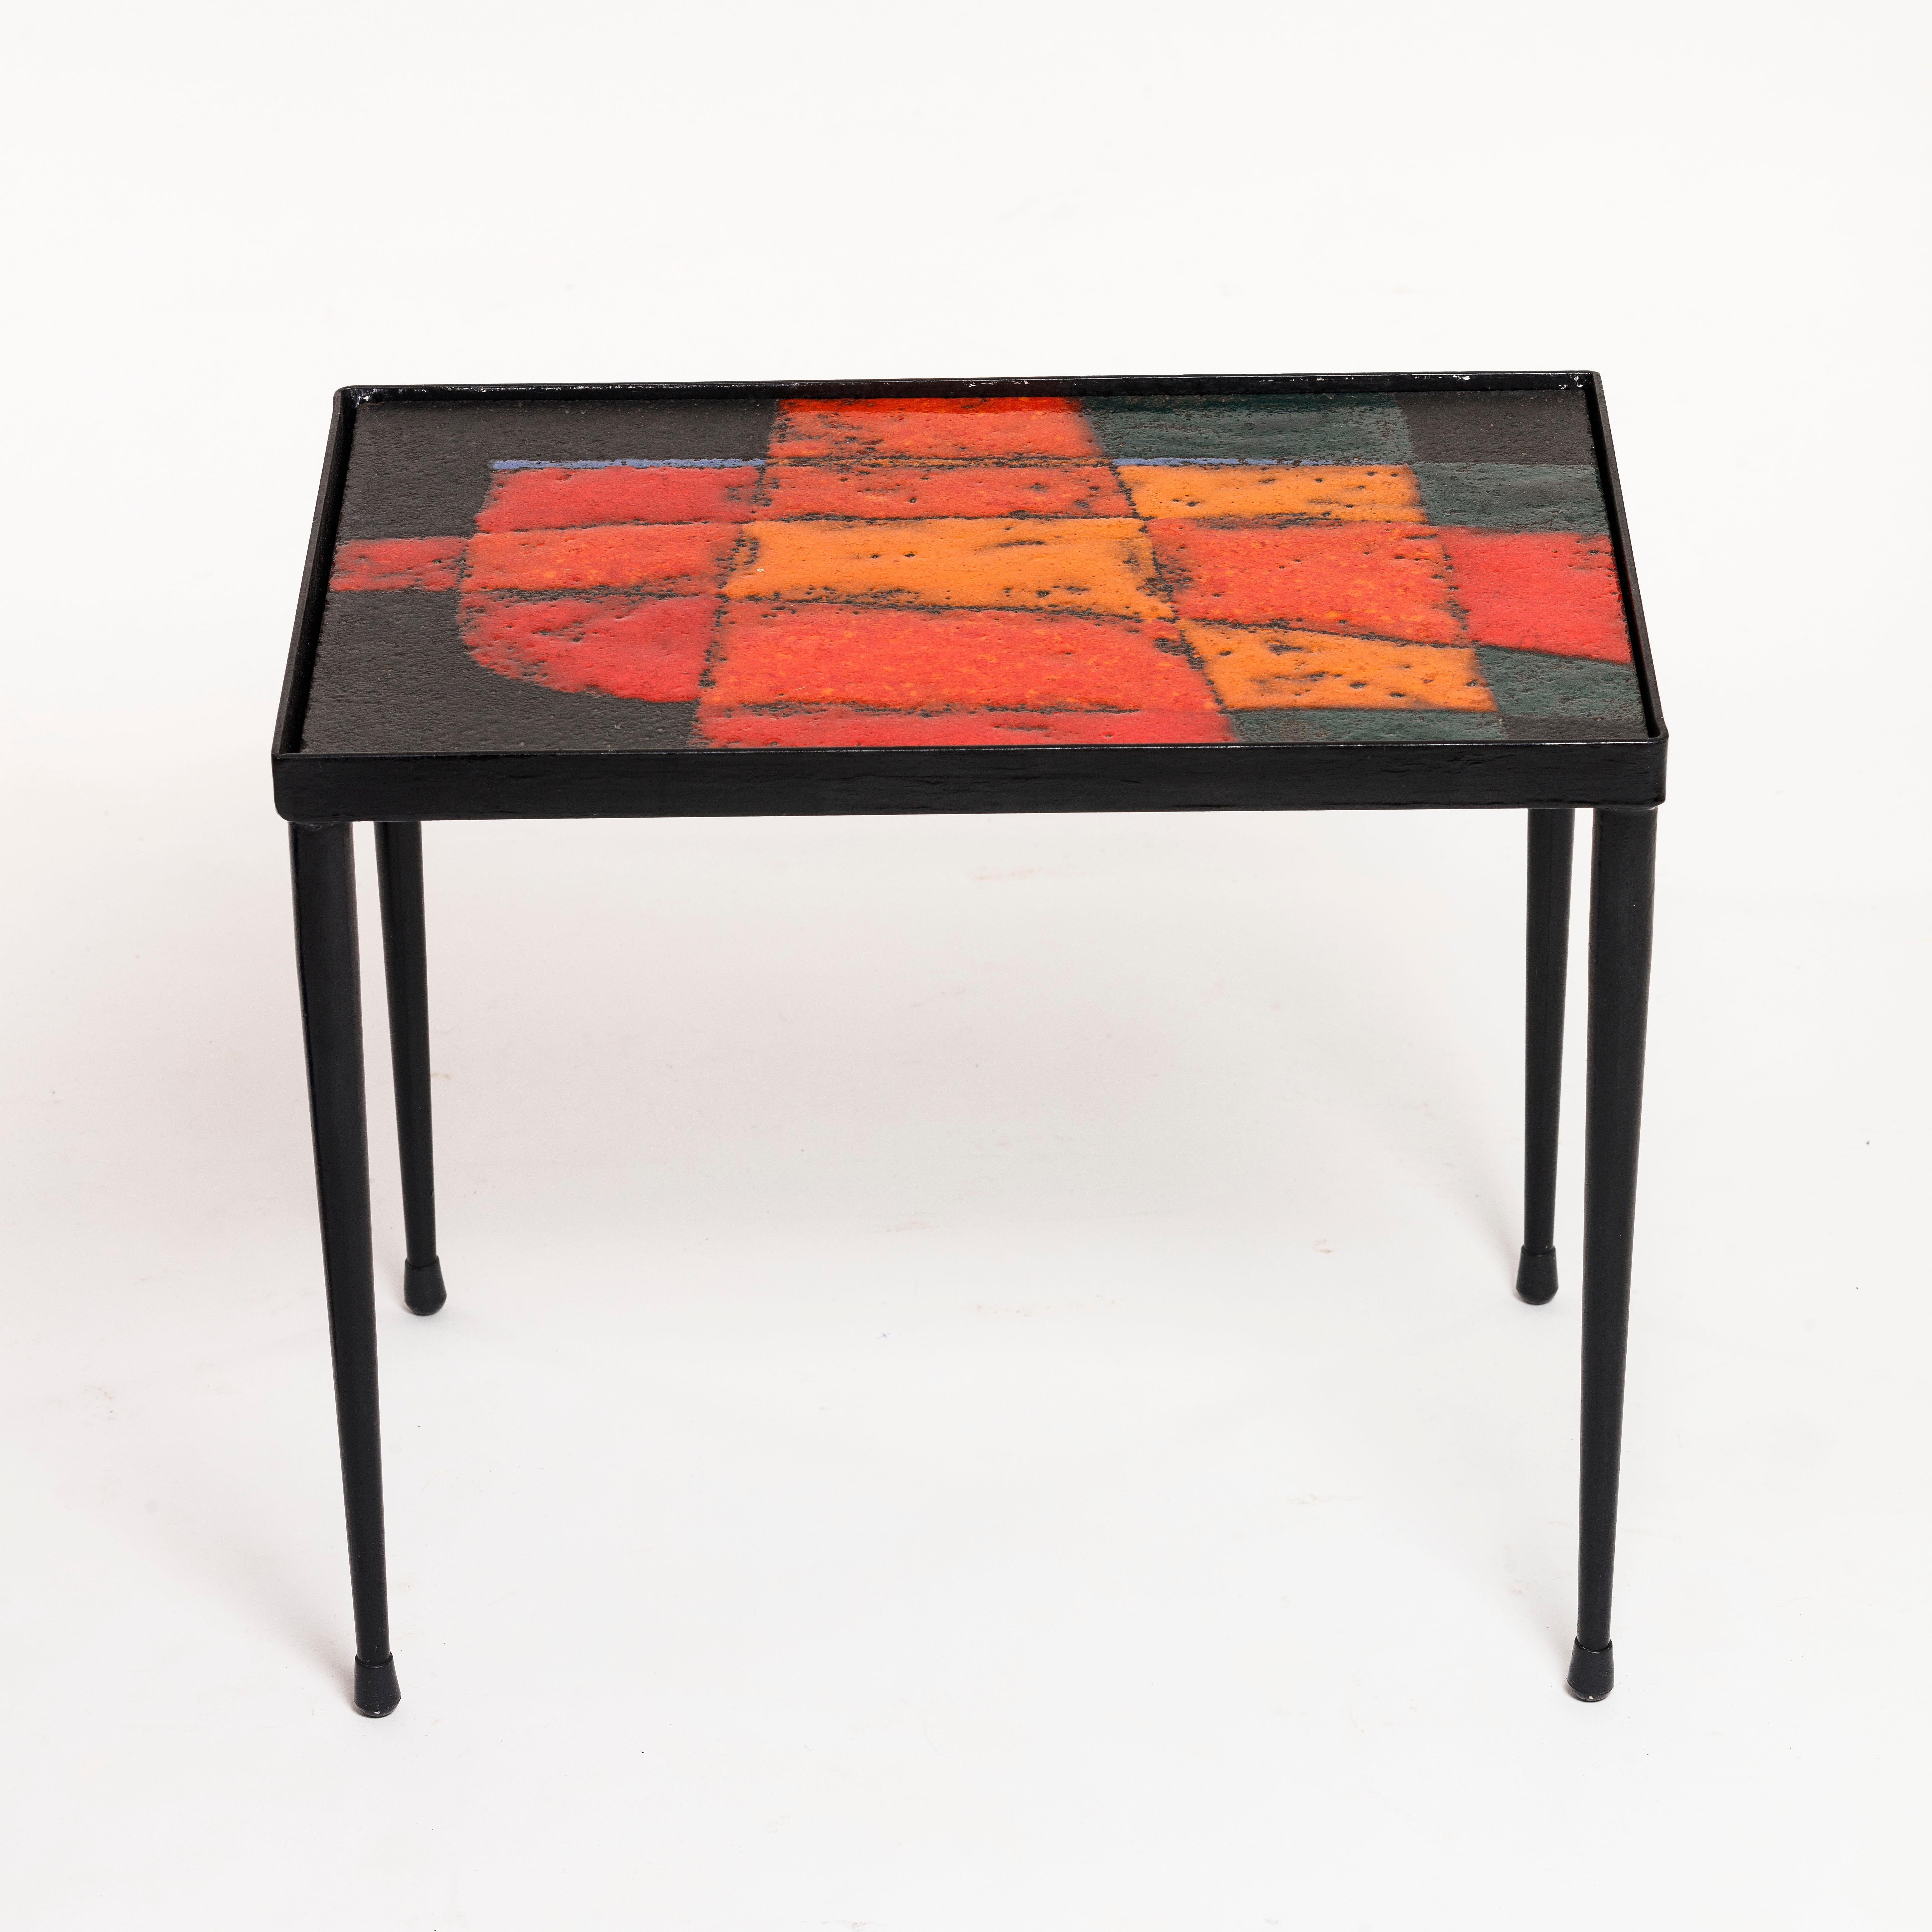 Rare red enameled lava tile low table by Robert and Jean Cloutier dating from the 1950s. This mid-century Lava Tile Coffee Table by the Cloutier Brothers is truly a one-of-a-kind piece.

Beautifully crafted from a black metal base, the rectangular